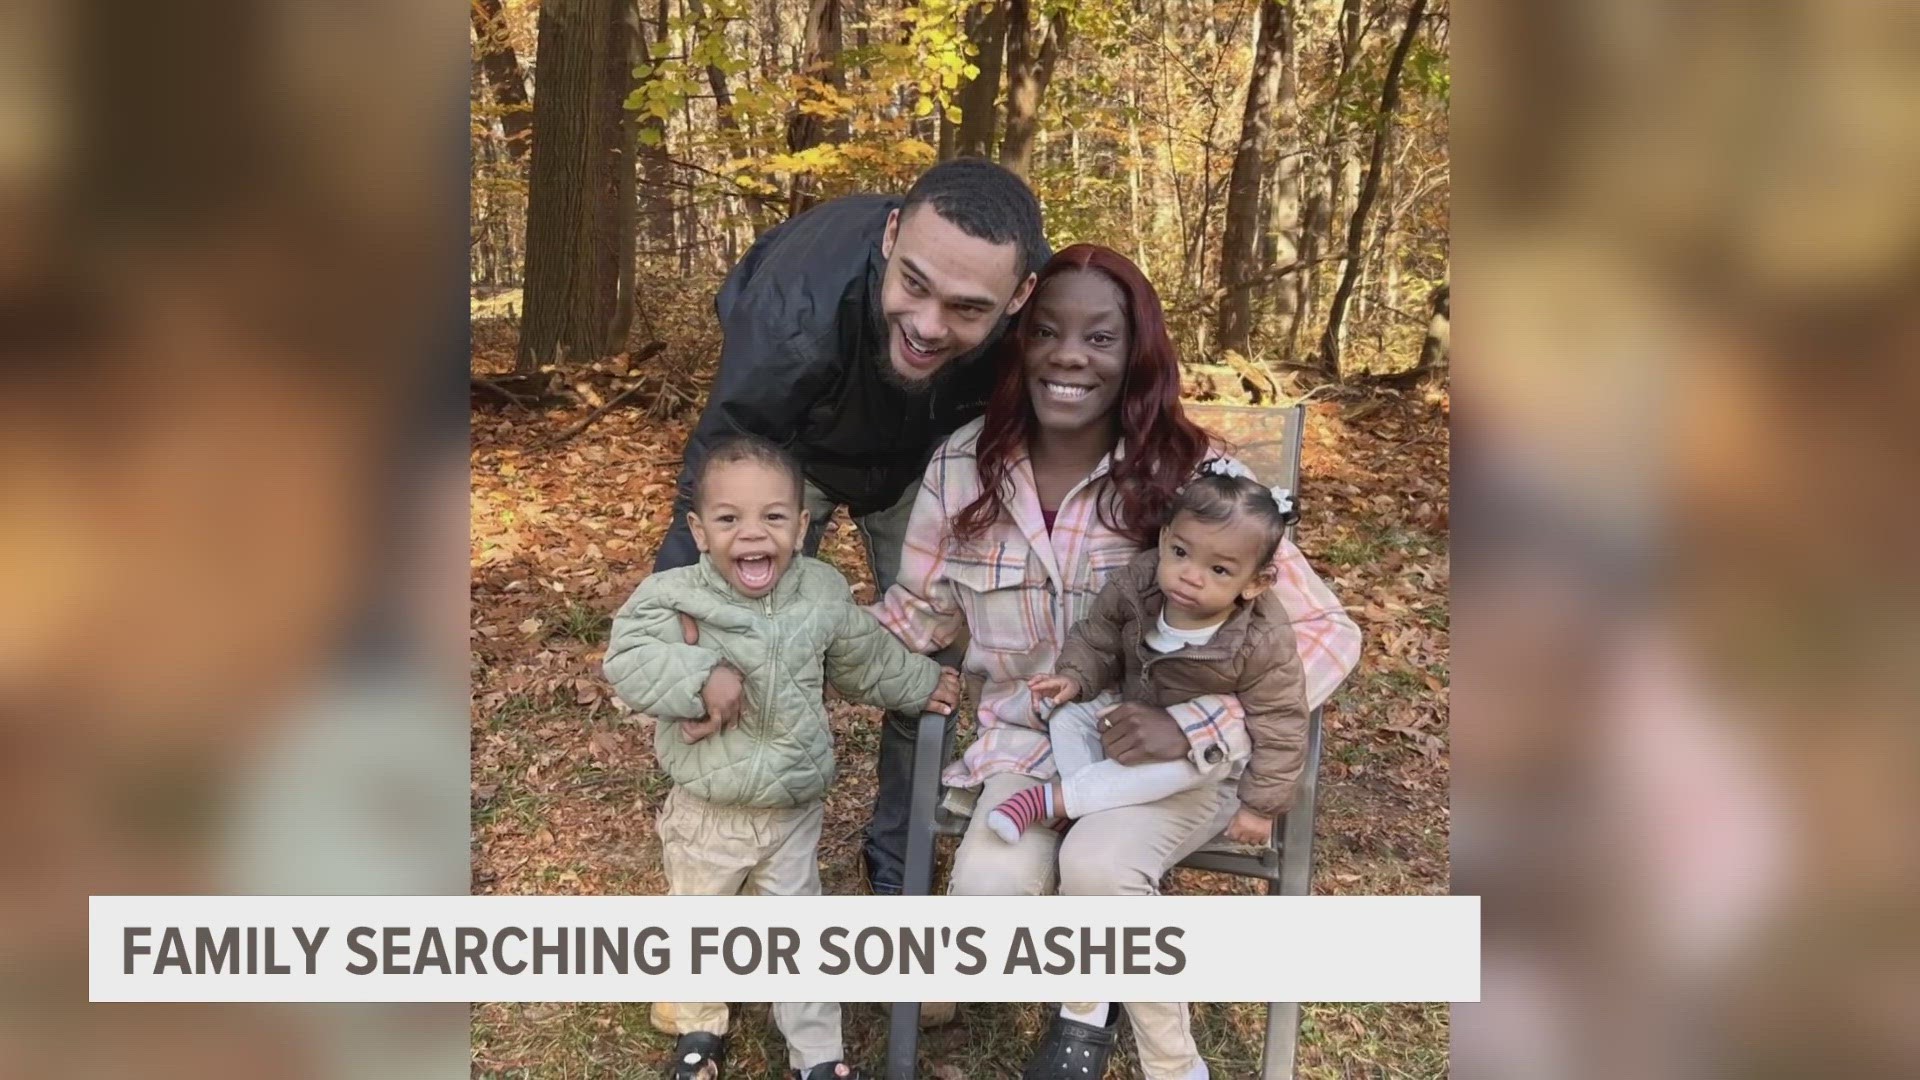 A Grand Rapids mother is asking for the return of 11 necklaces containing her son's ashes after they were stolen last week.